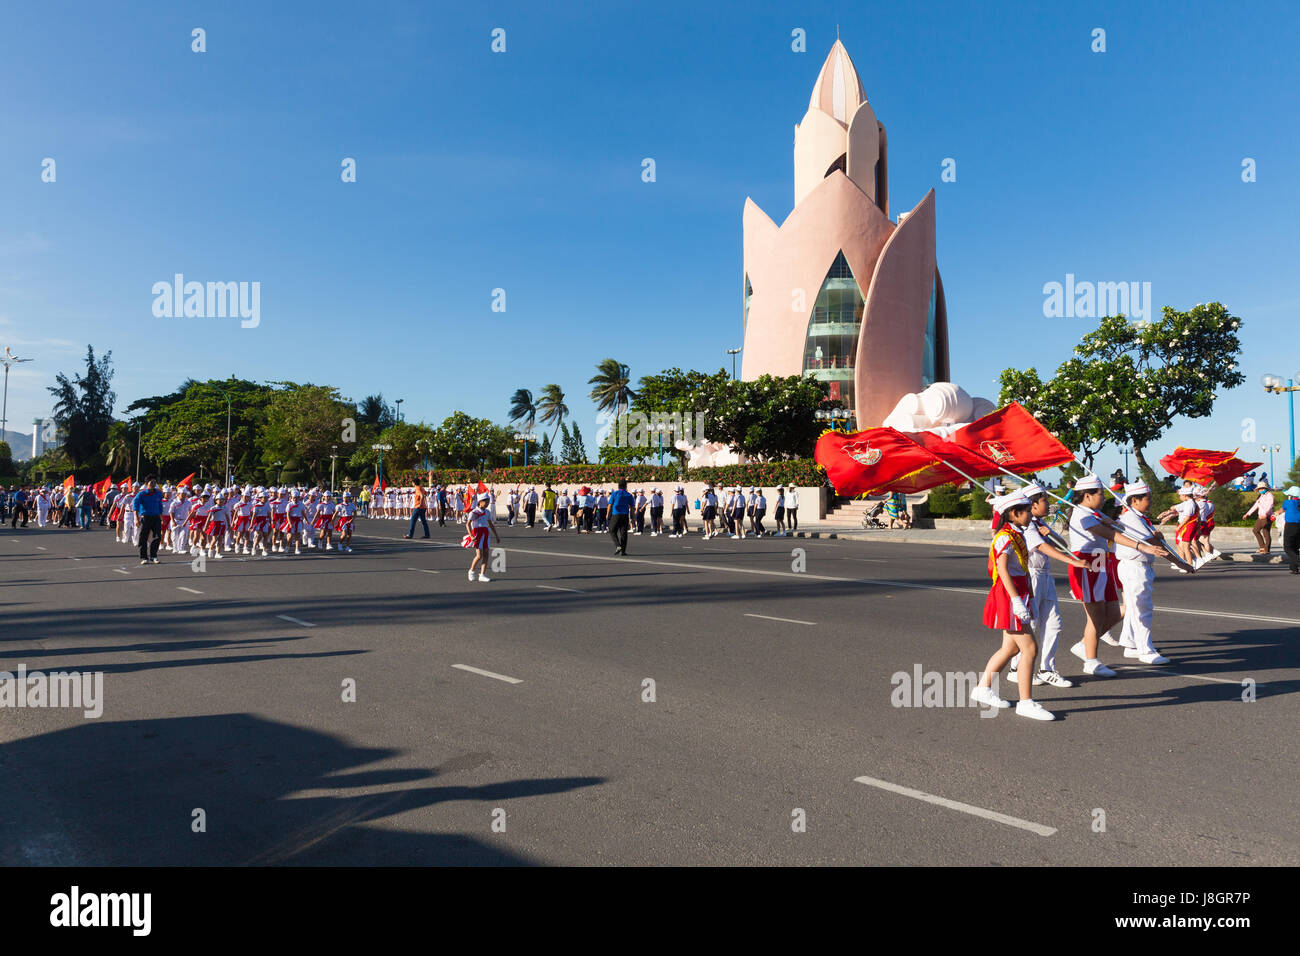 Nha Trang, Vietnam - May 31, 2016: Pioneer children march on the parade at the end of the school year in Nha Trang, Vietnam on May 31, 2016. Stock Photo